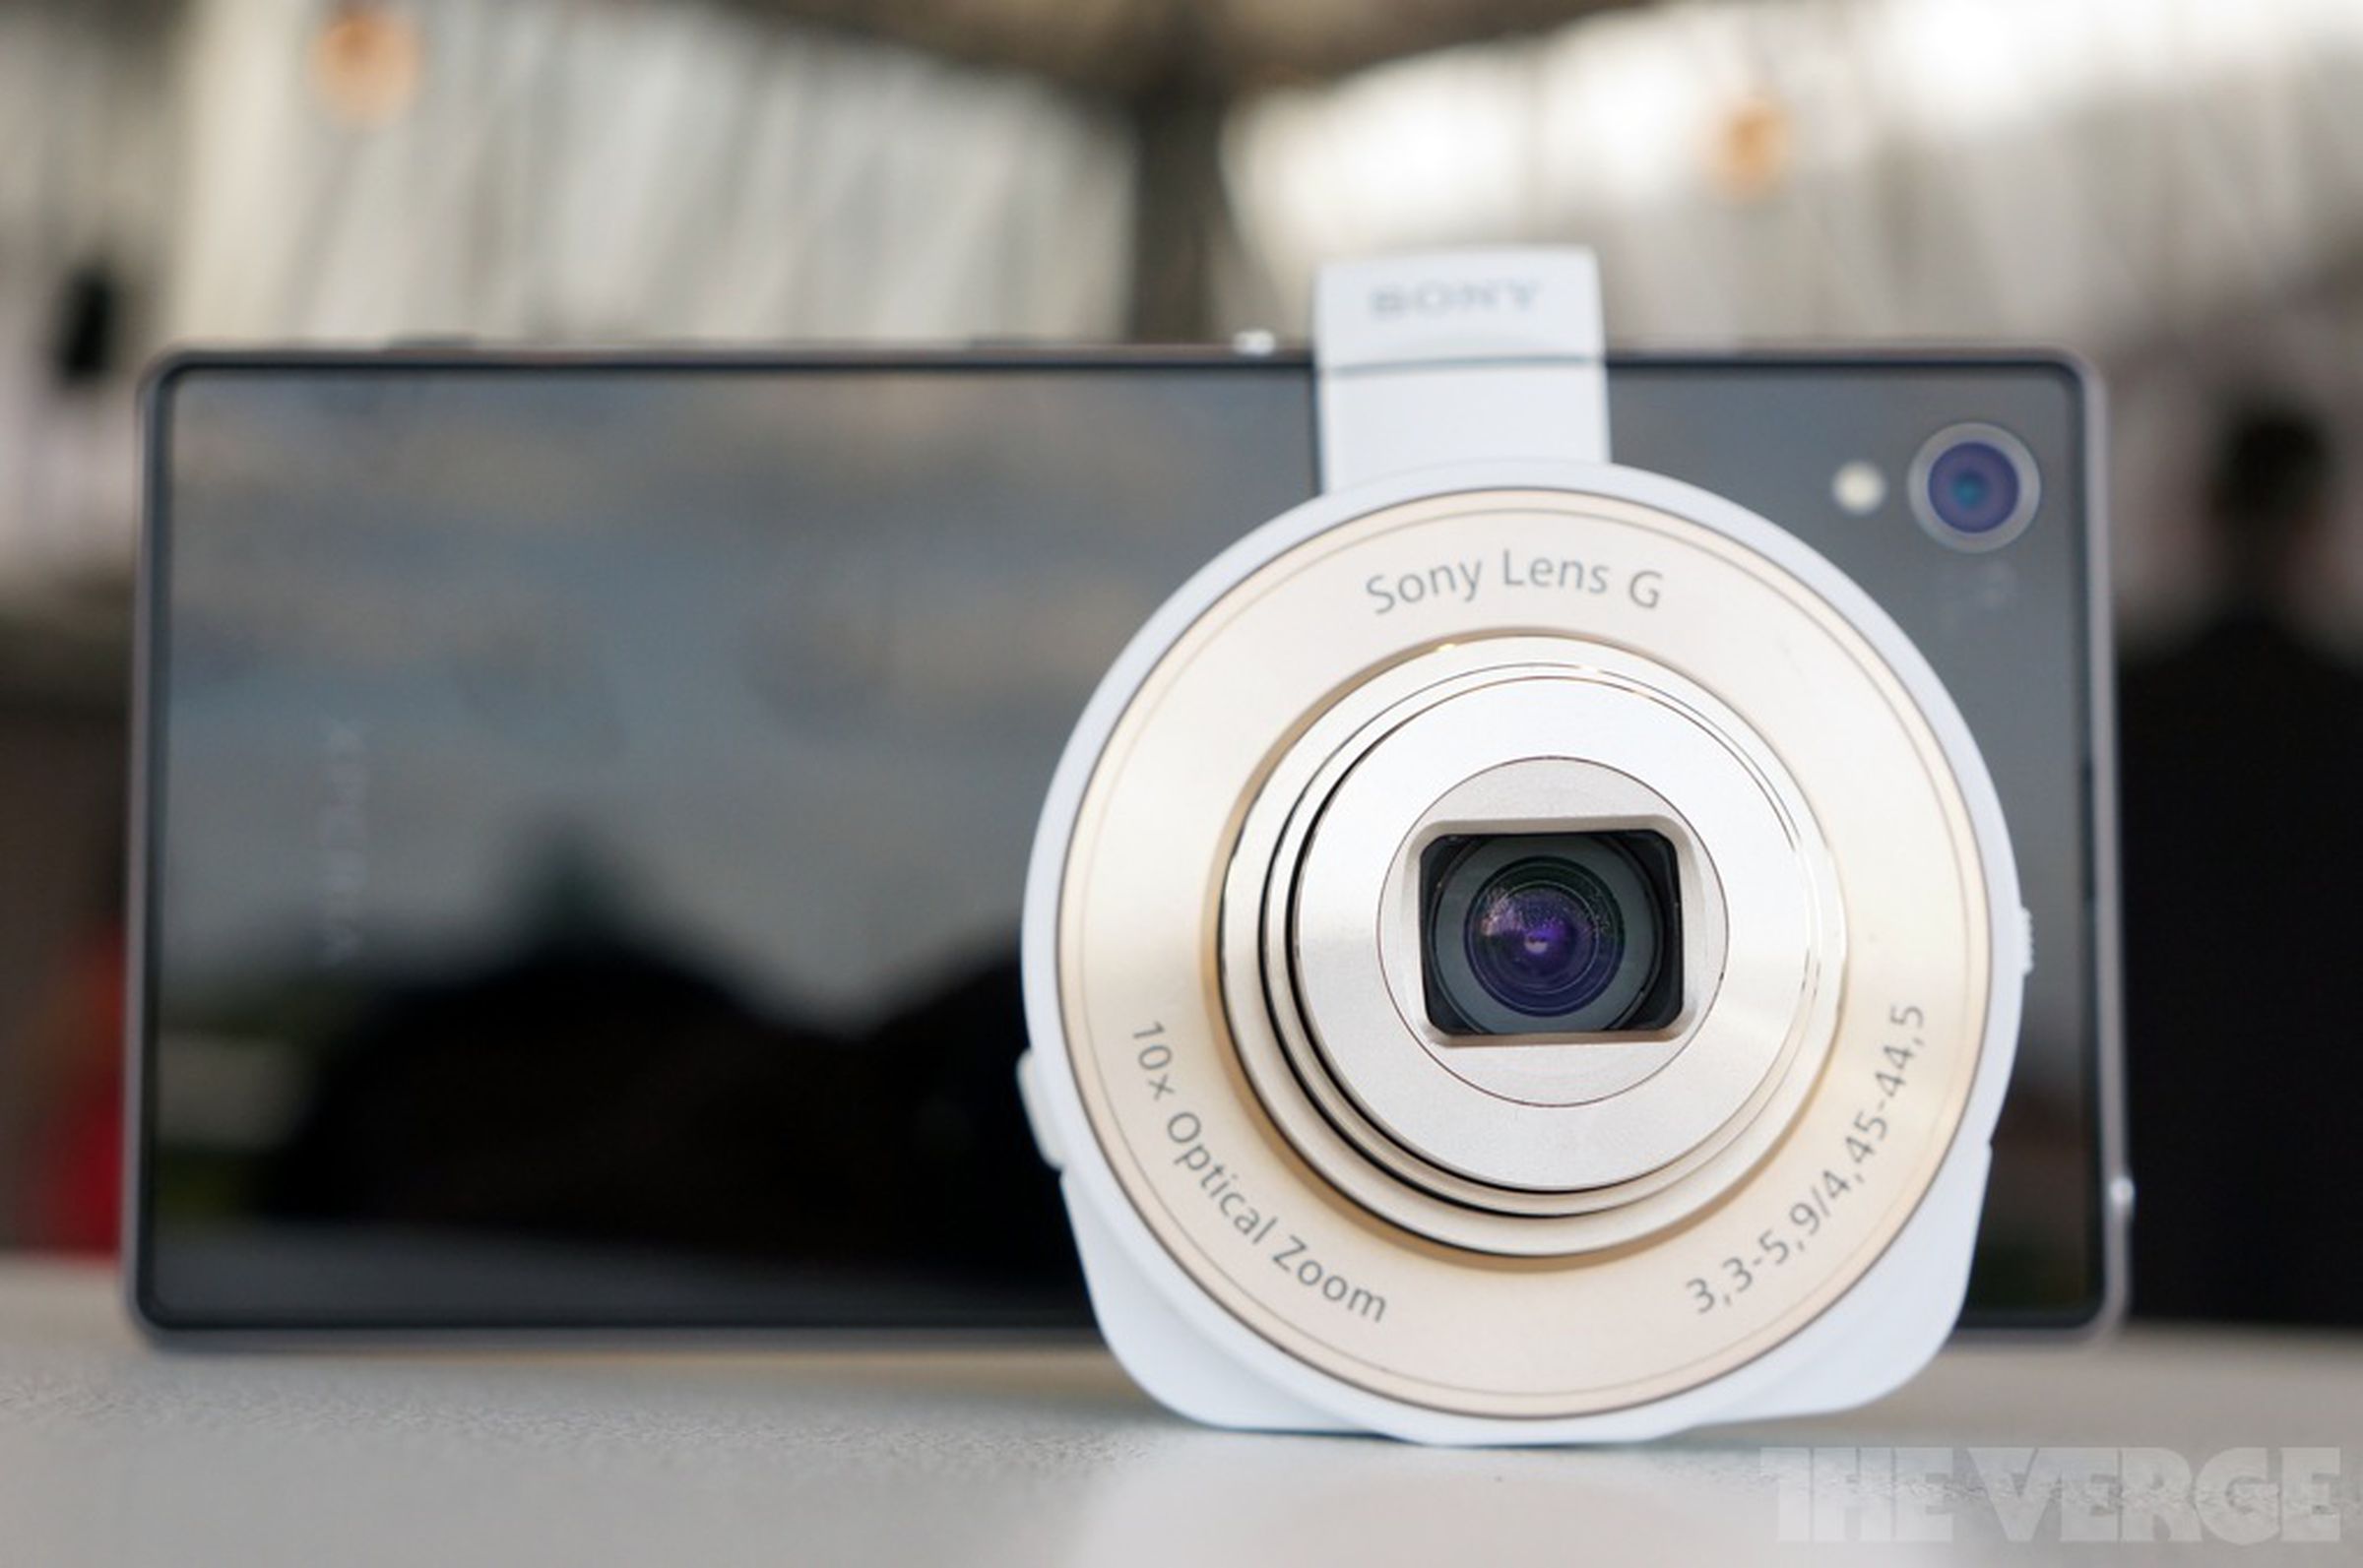 Sony QX100 and QX10 lens cameras hands-on gallery